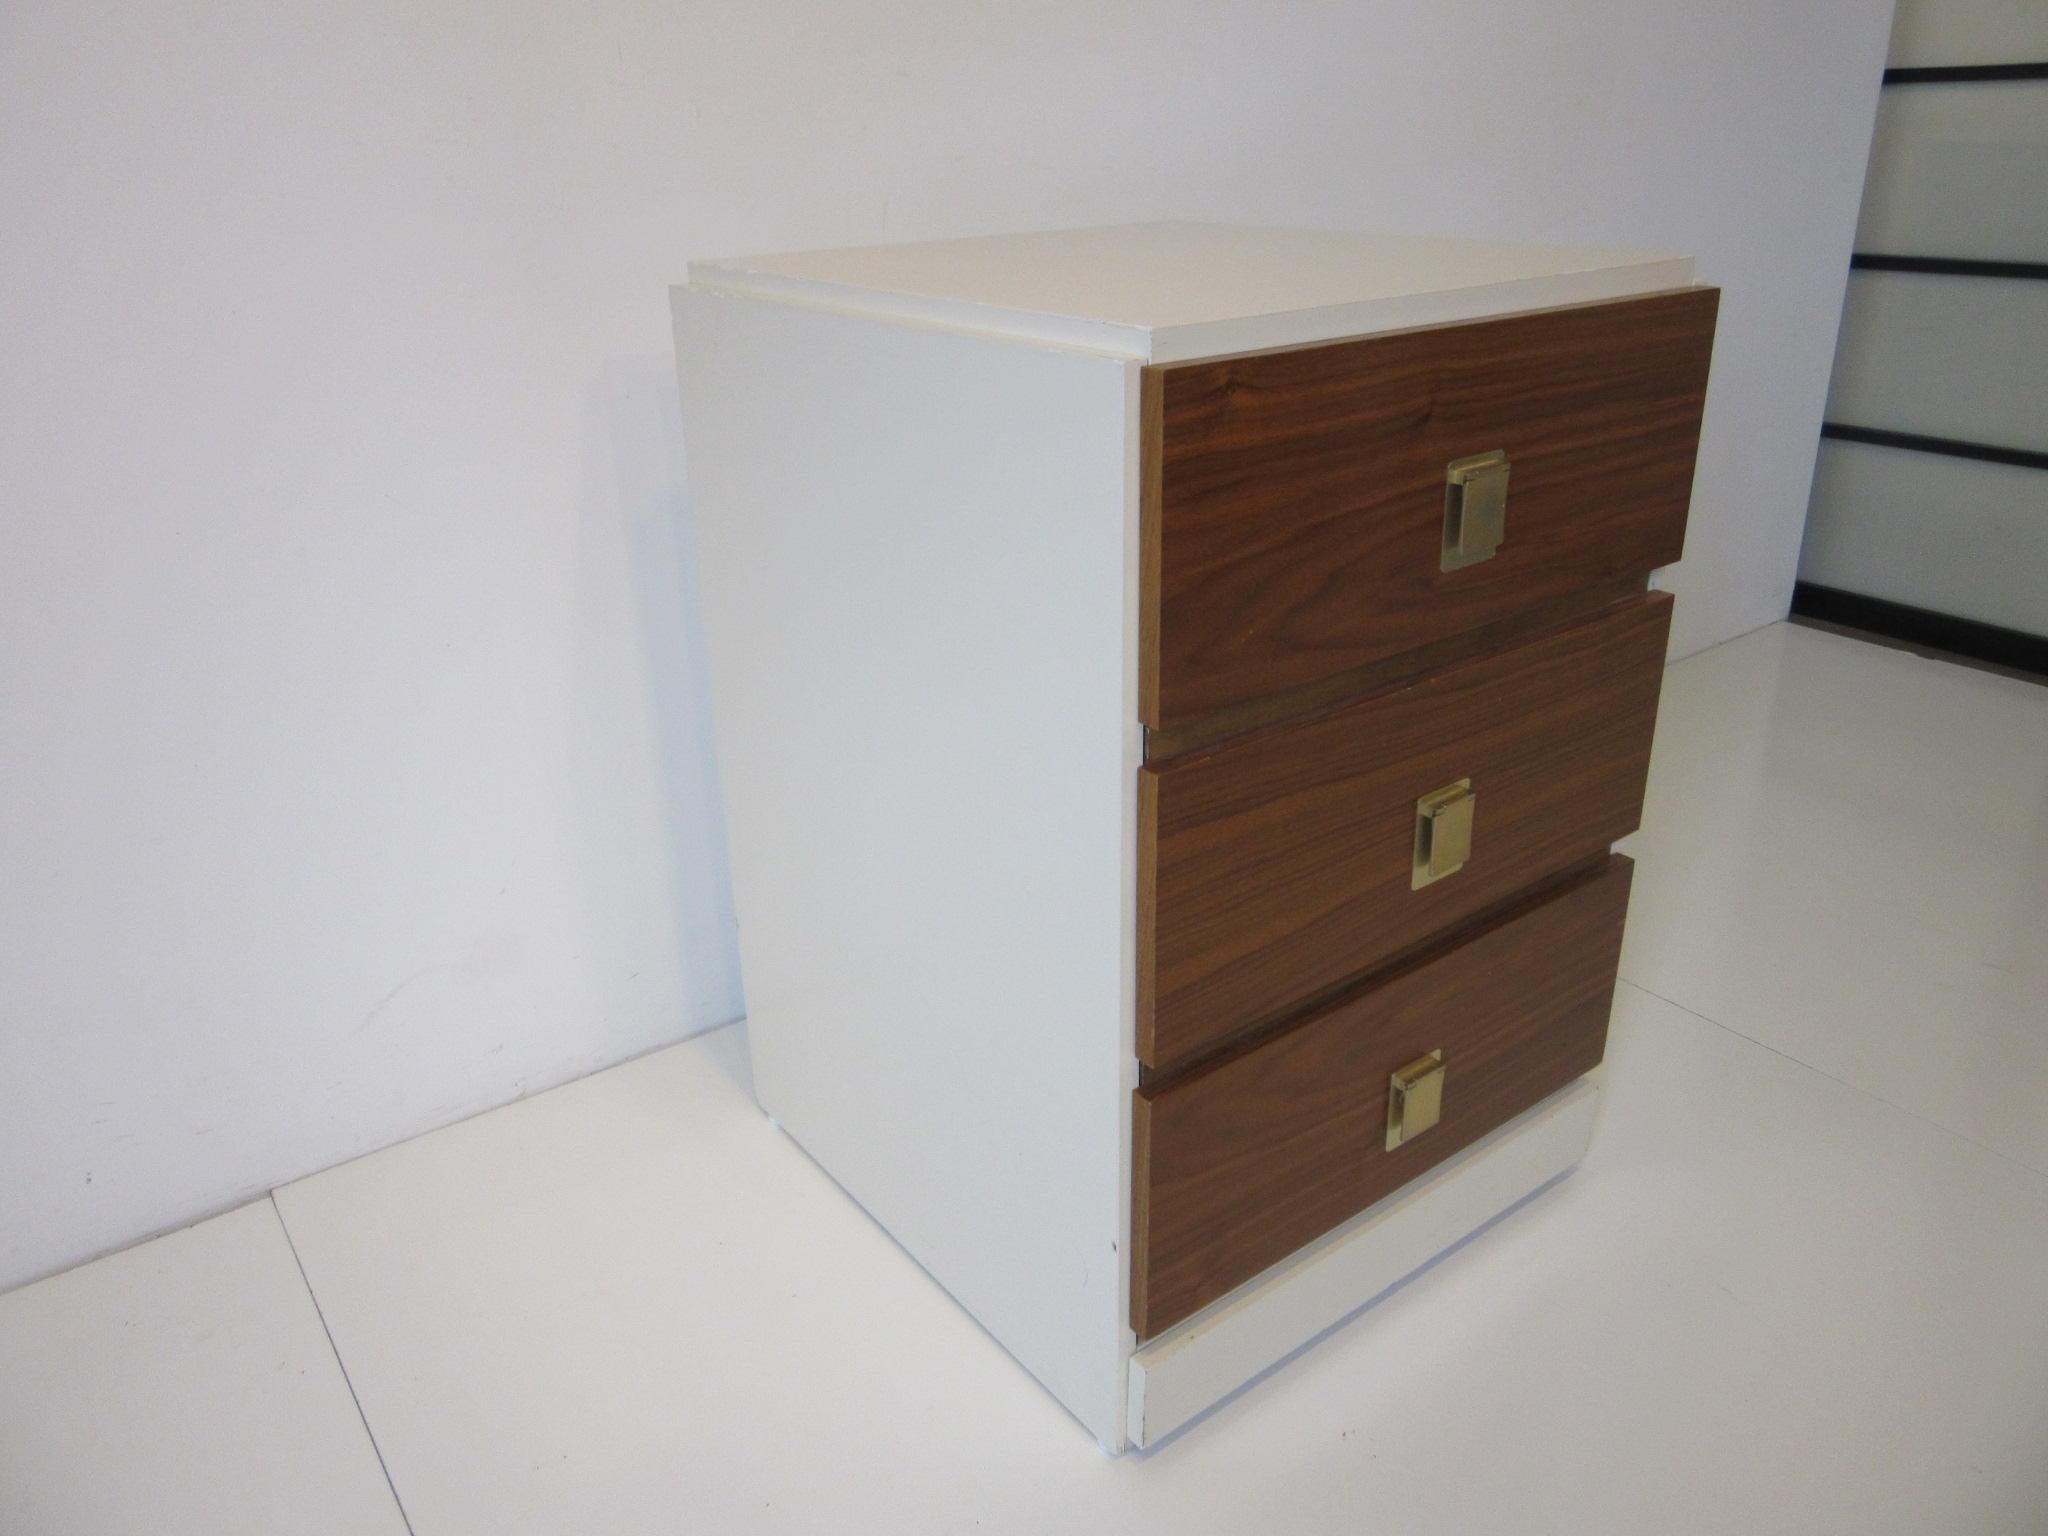 A small three-drawer chest with walnut drawer fronts having brass pulls and a cream lacquer painted cabinet in the style of Milo Baughman manufactured in Canada. Can be used as a single nightstand or where you need some storage in a small space.